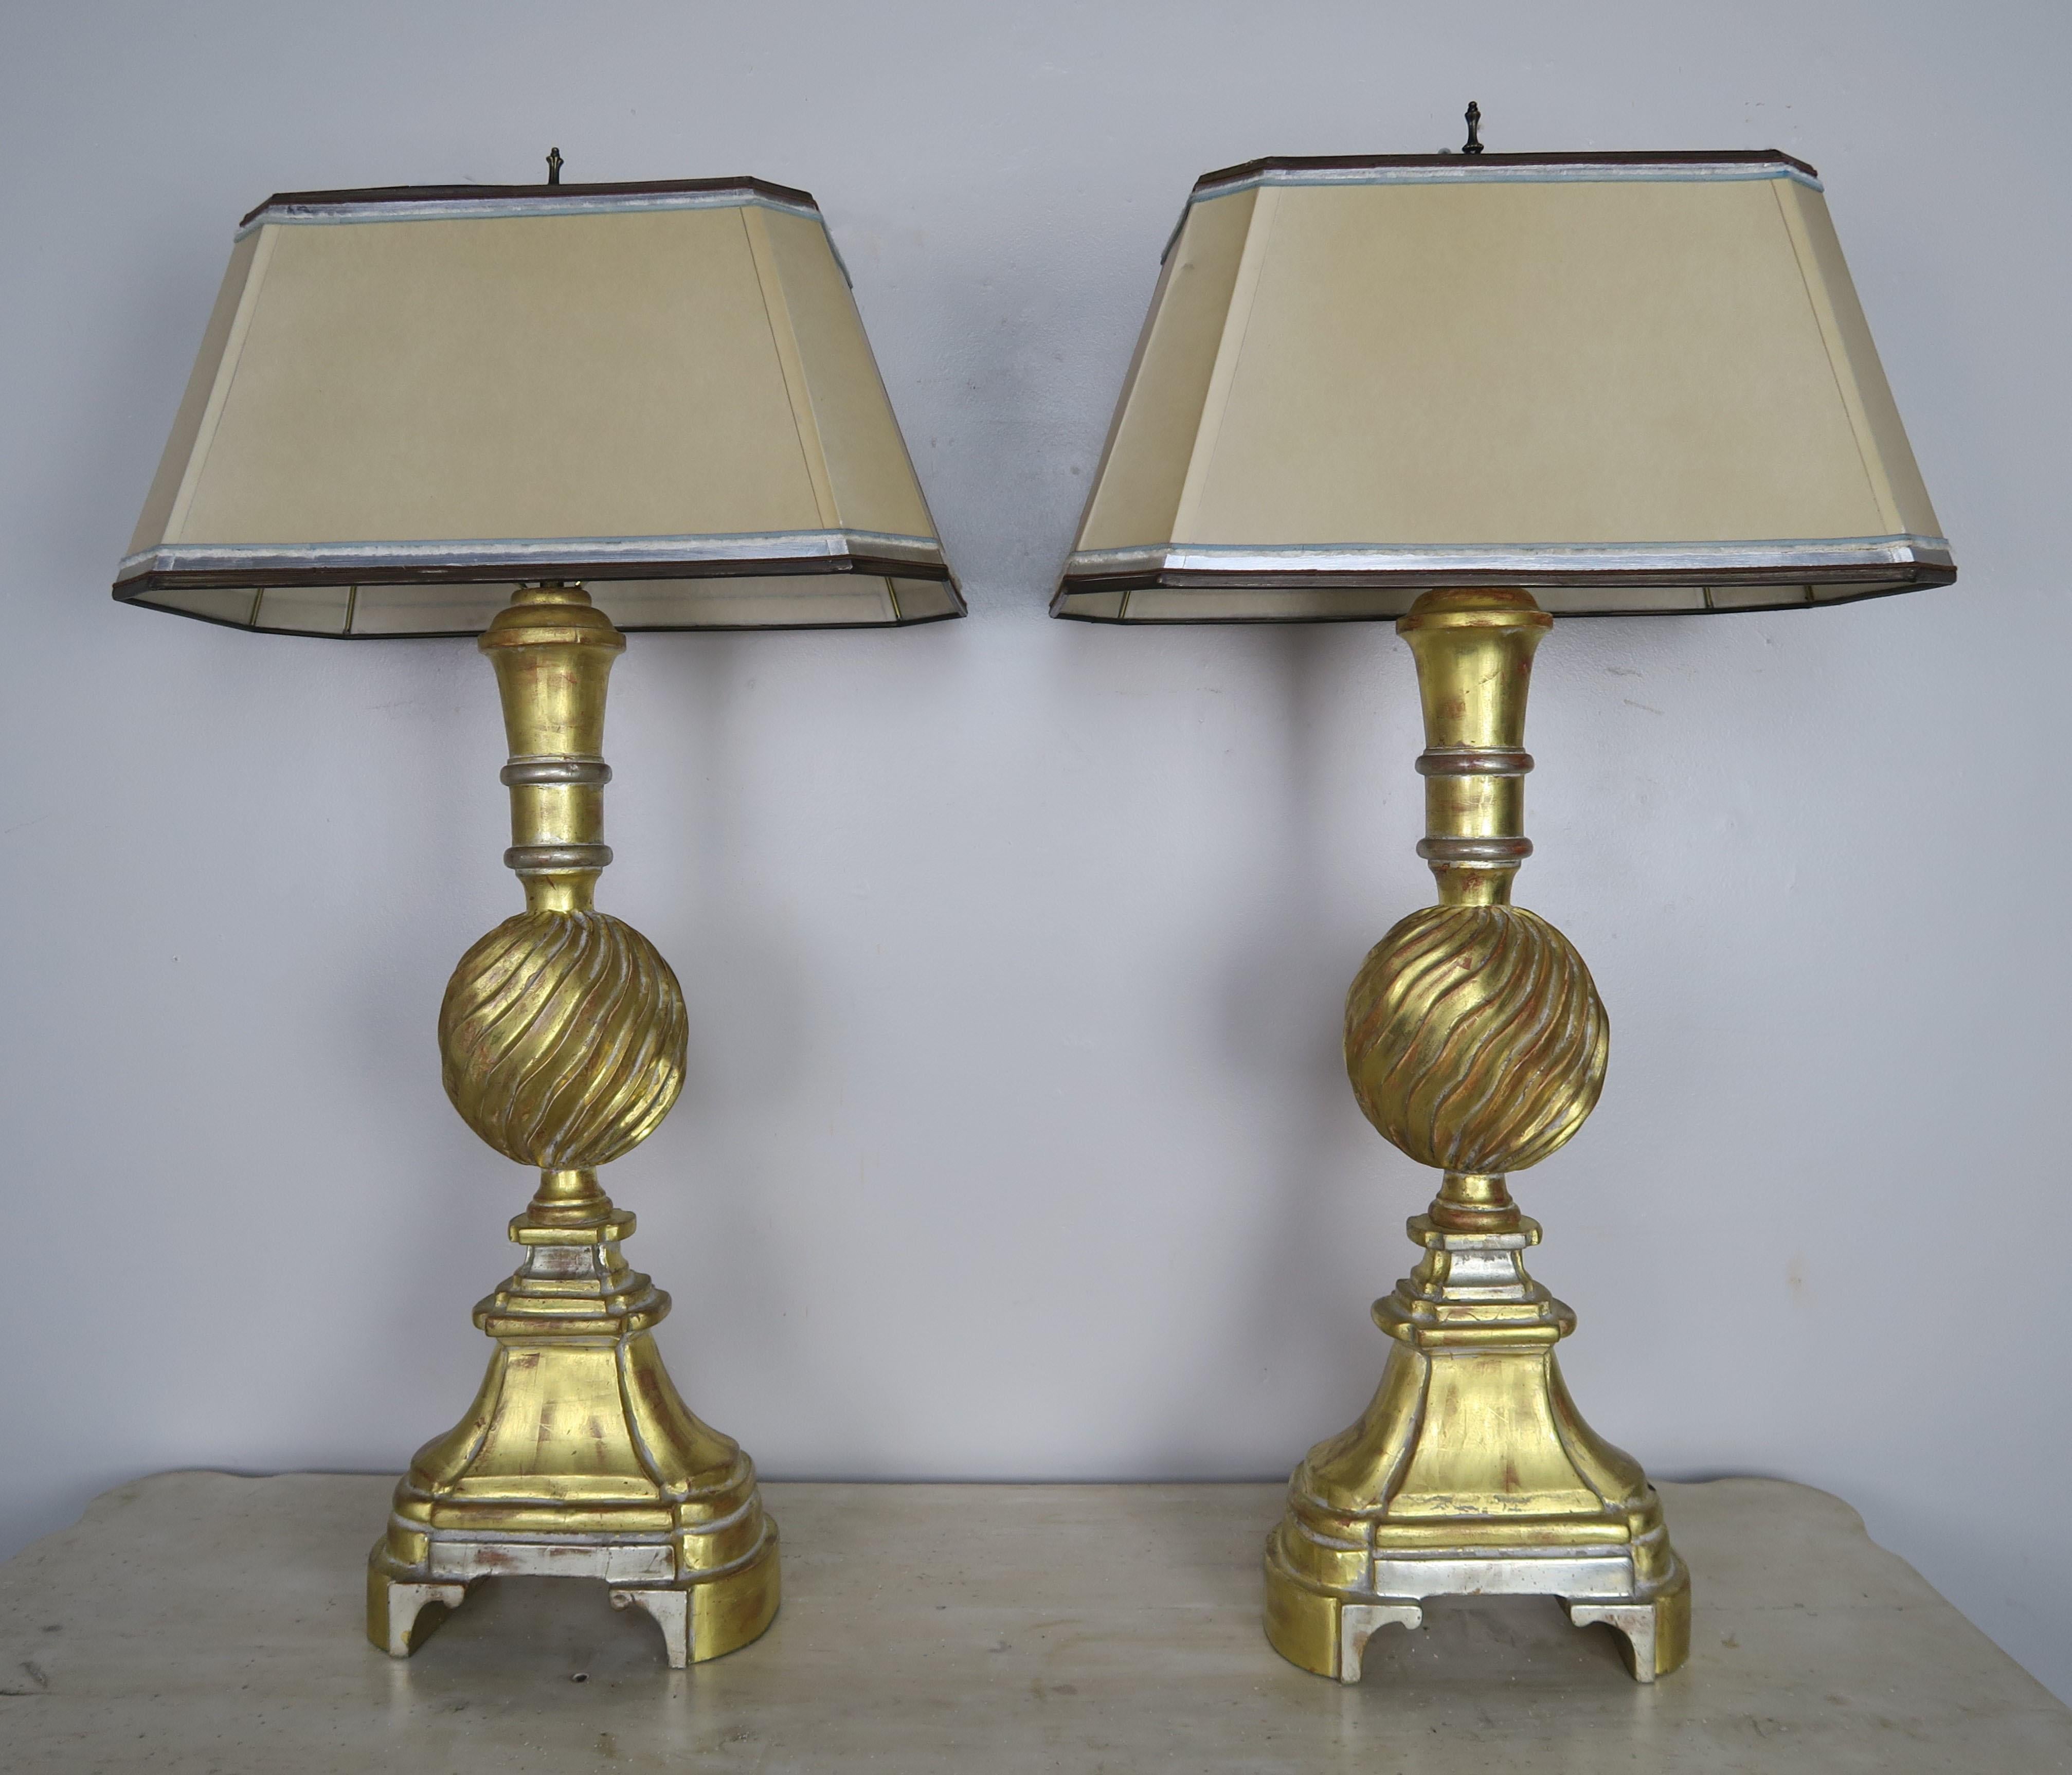 Pair of 20th century 22-karat gold and silver leaf carved wood sculptural shaped lamps. The lamps are newly rewired and crowned with custom hand painted parchment rectangular shaped shades.